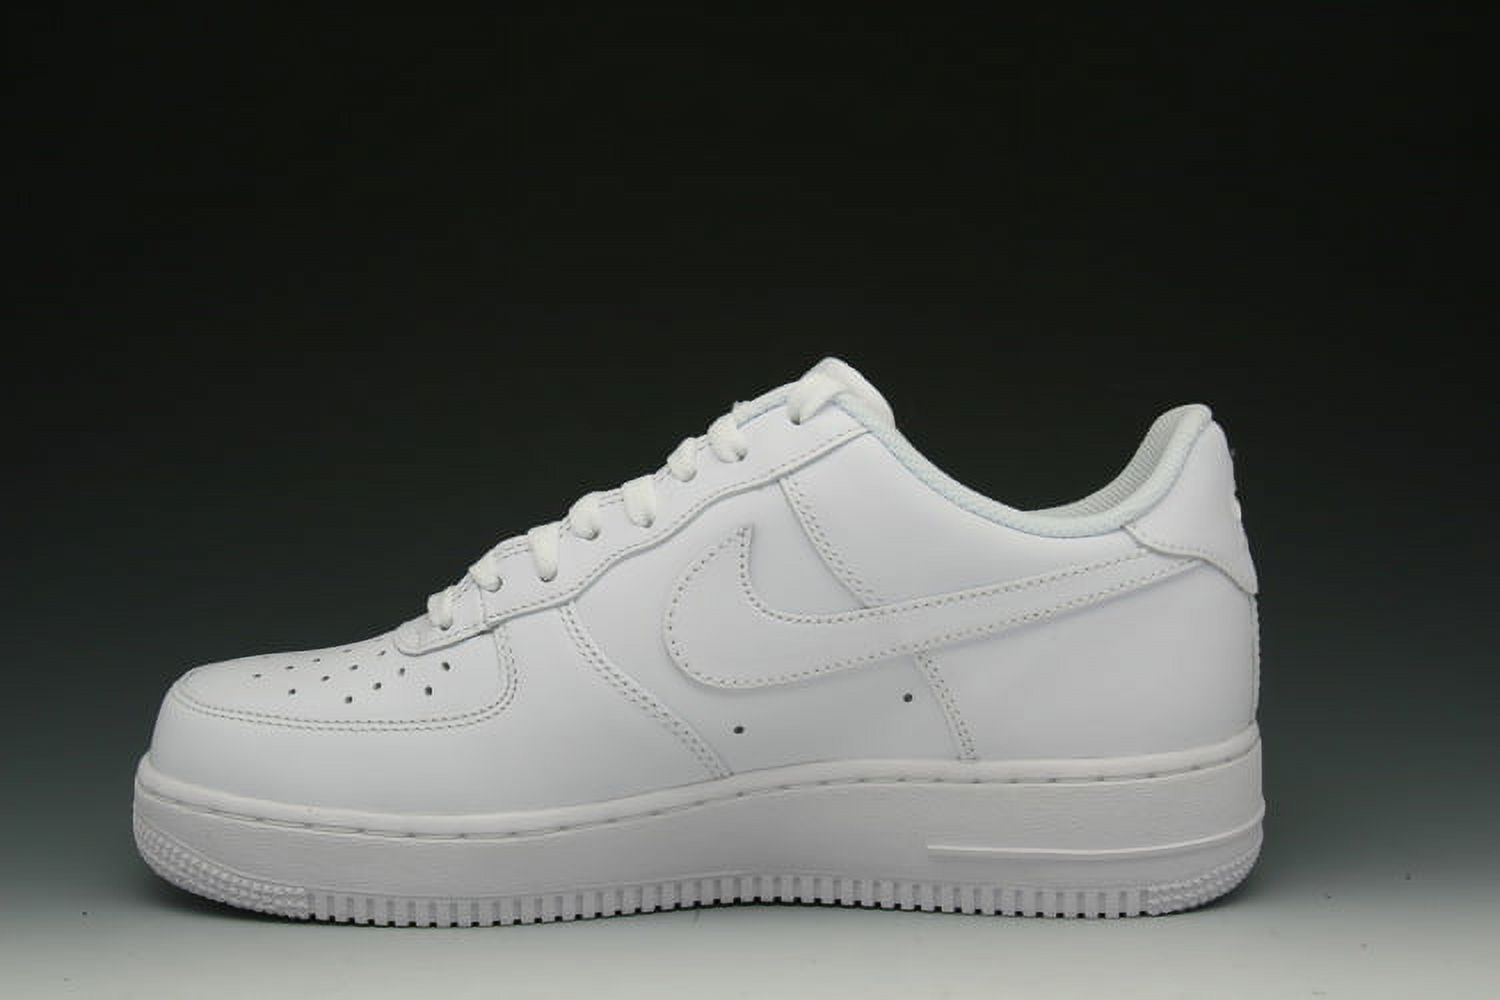 Nike Mens Air Force 1 Low White/White Leather Casual Shoes 6 M US - image 2 of 3